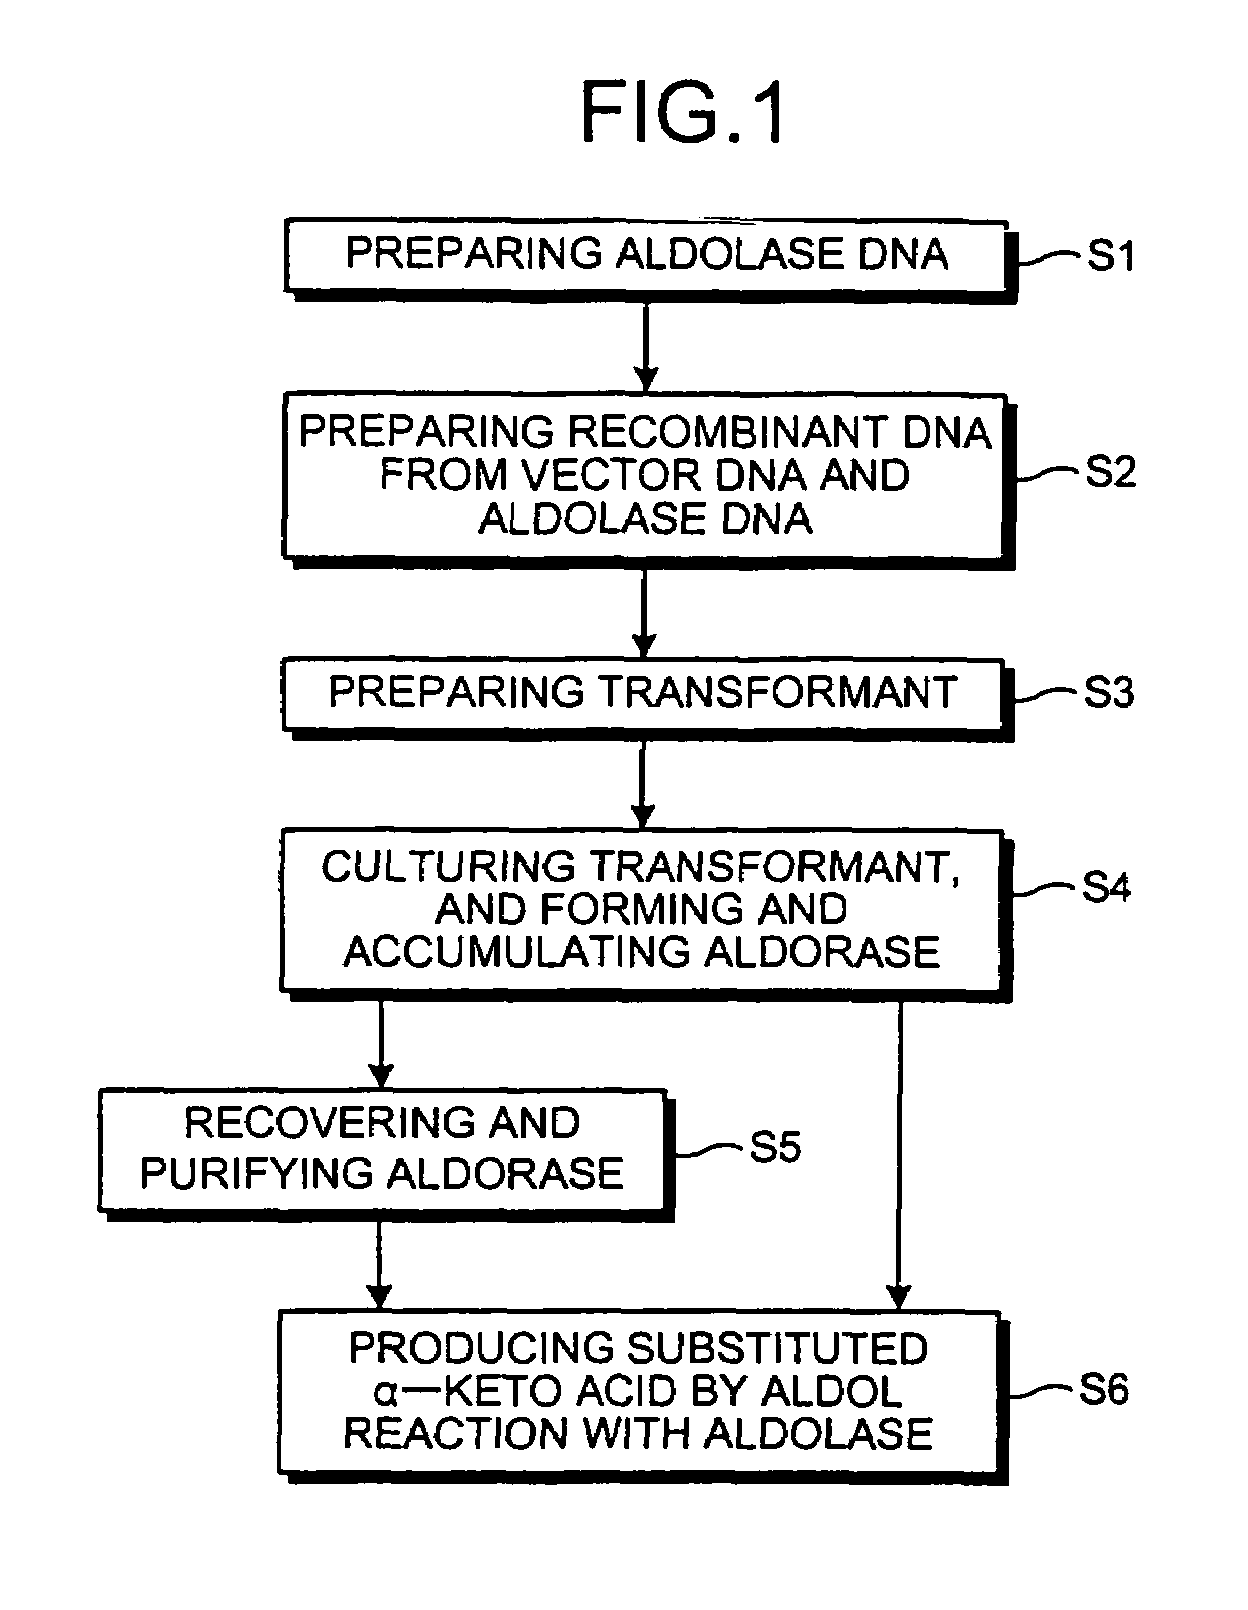 Aldolase and production process of substituted alpha-keto acids